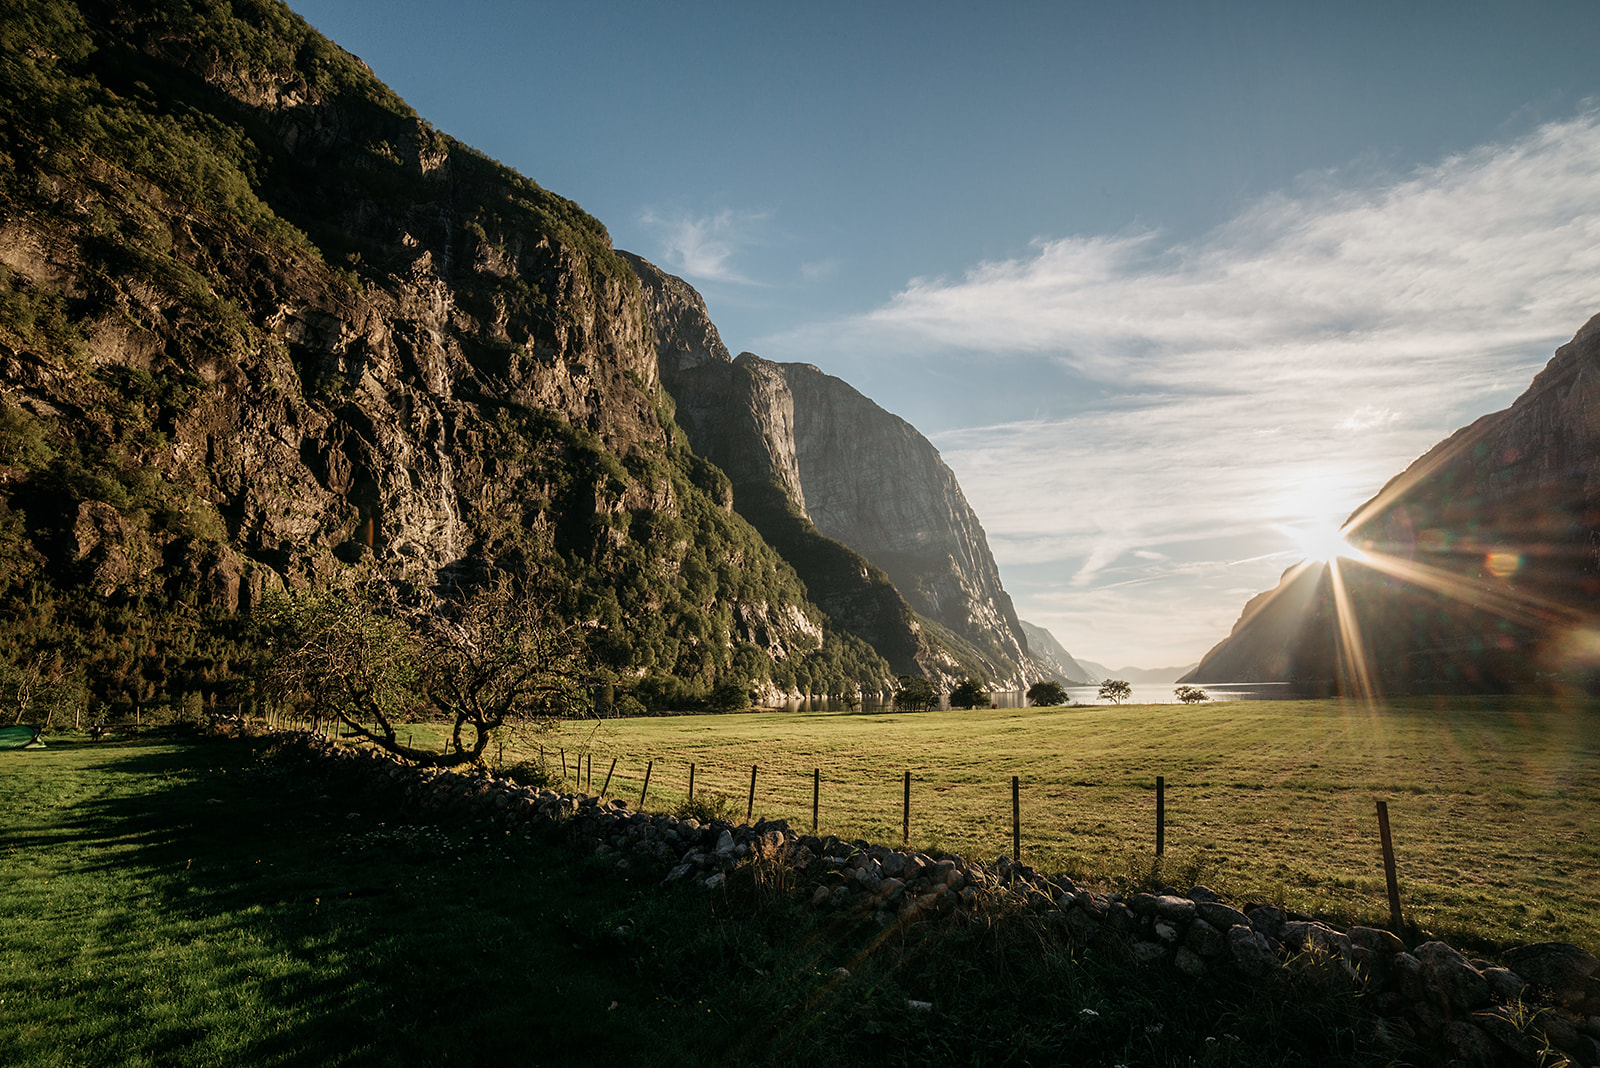 Sunlight hitting a small stone wall on field in a valley